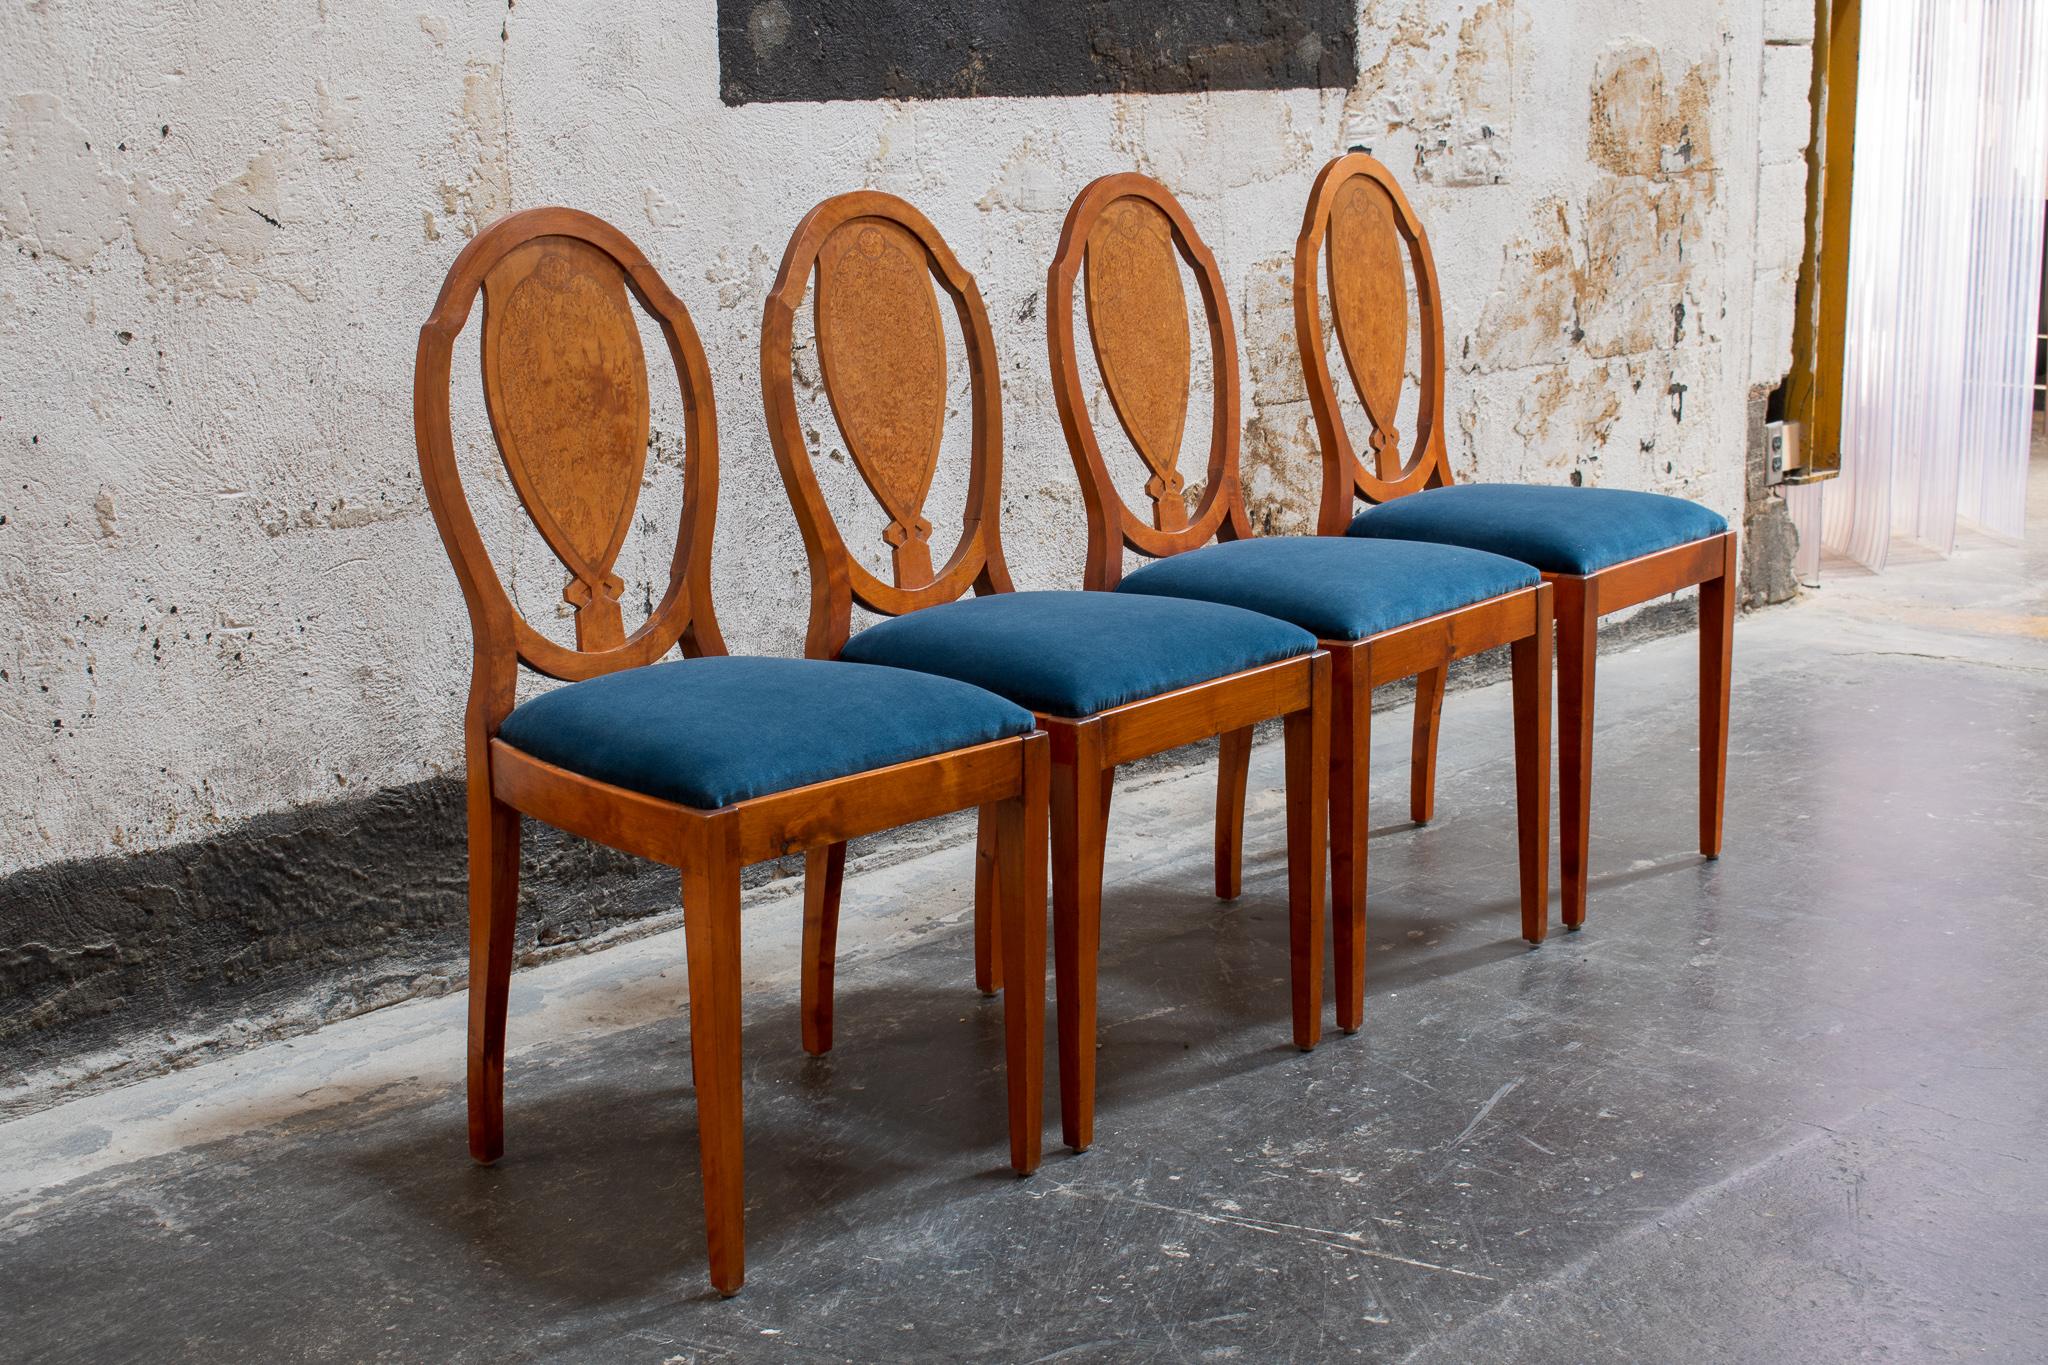 Neoclassical Revival Vintage Swedish Golden Burl Birch Dining Chairs, Set of Four For Sale